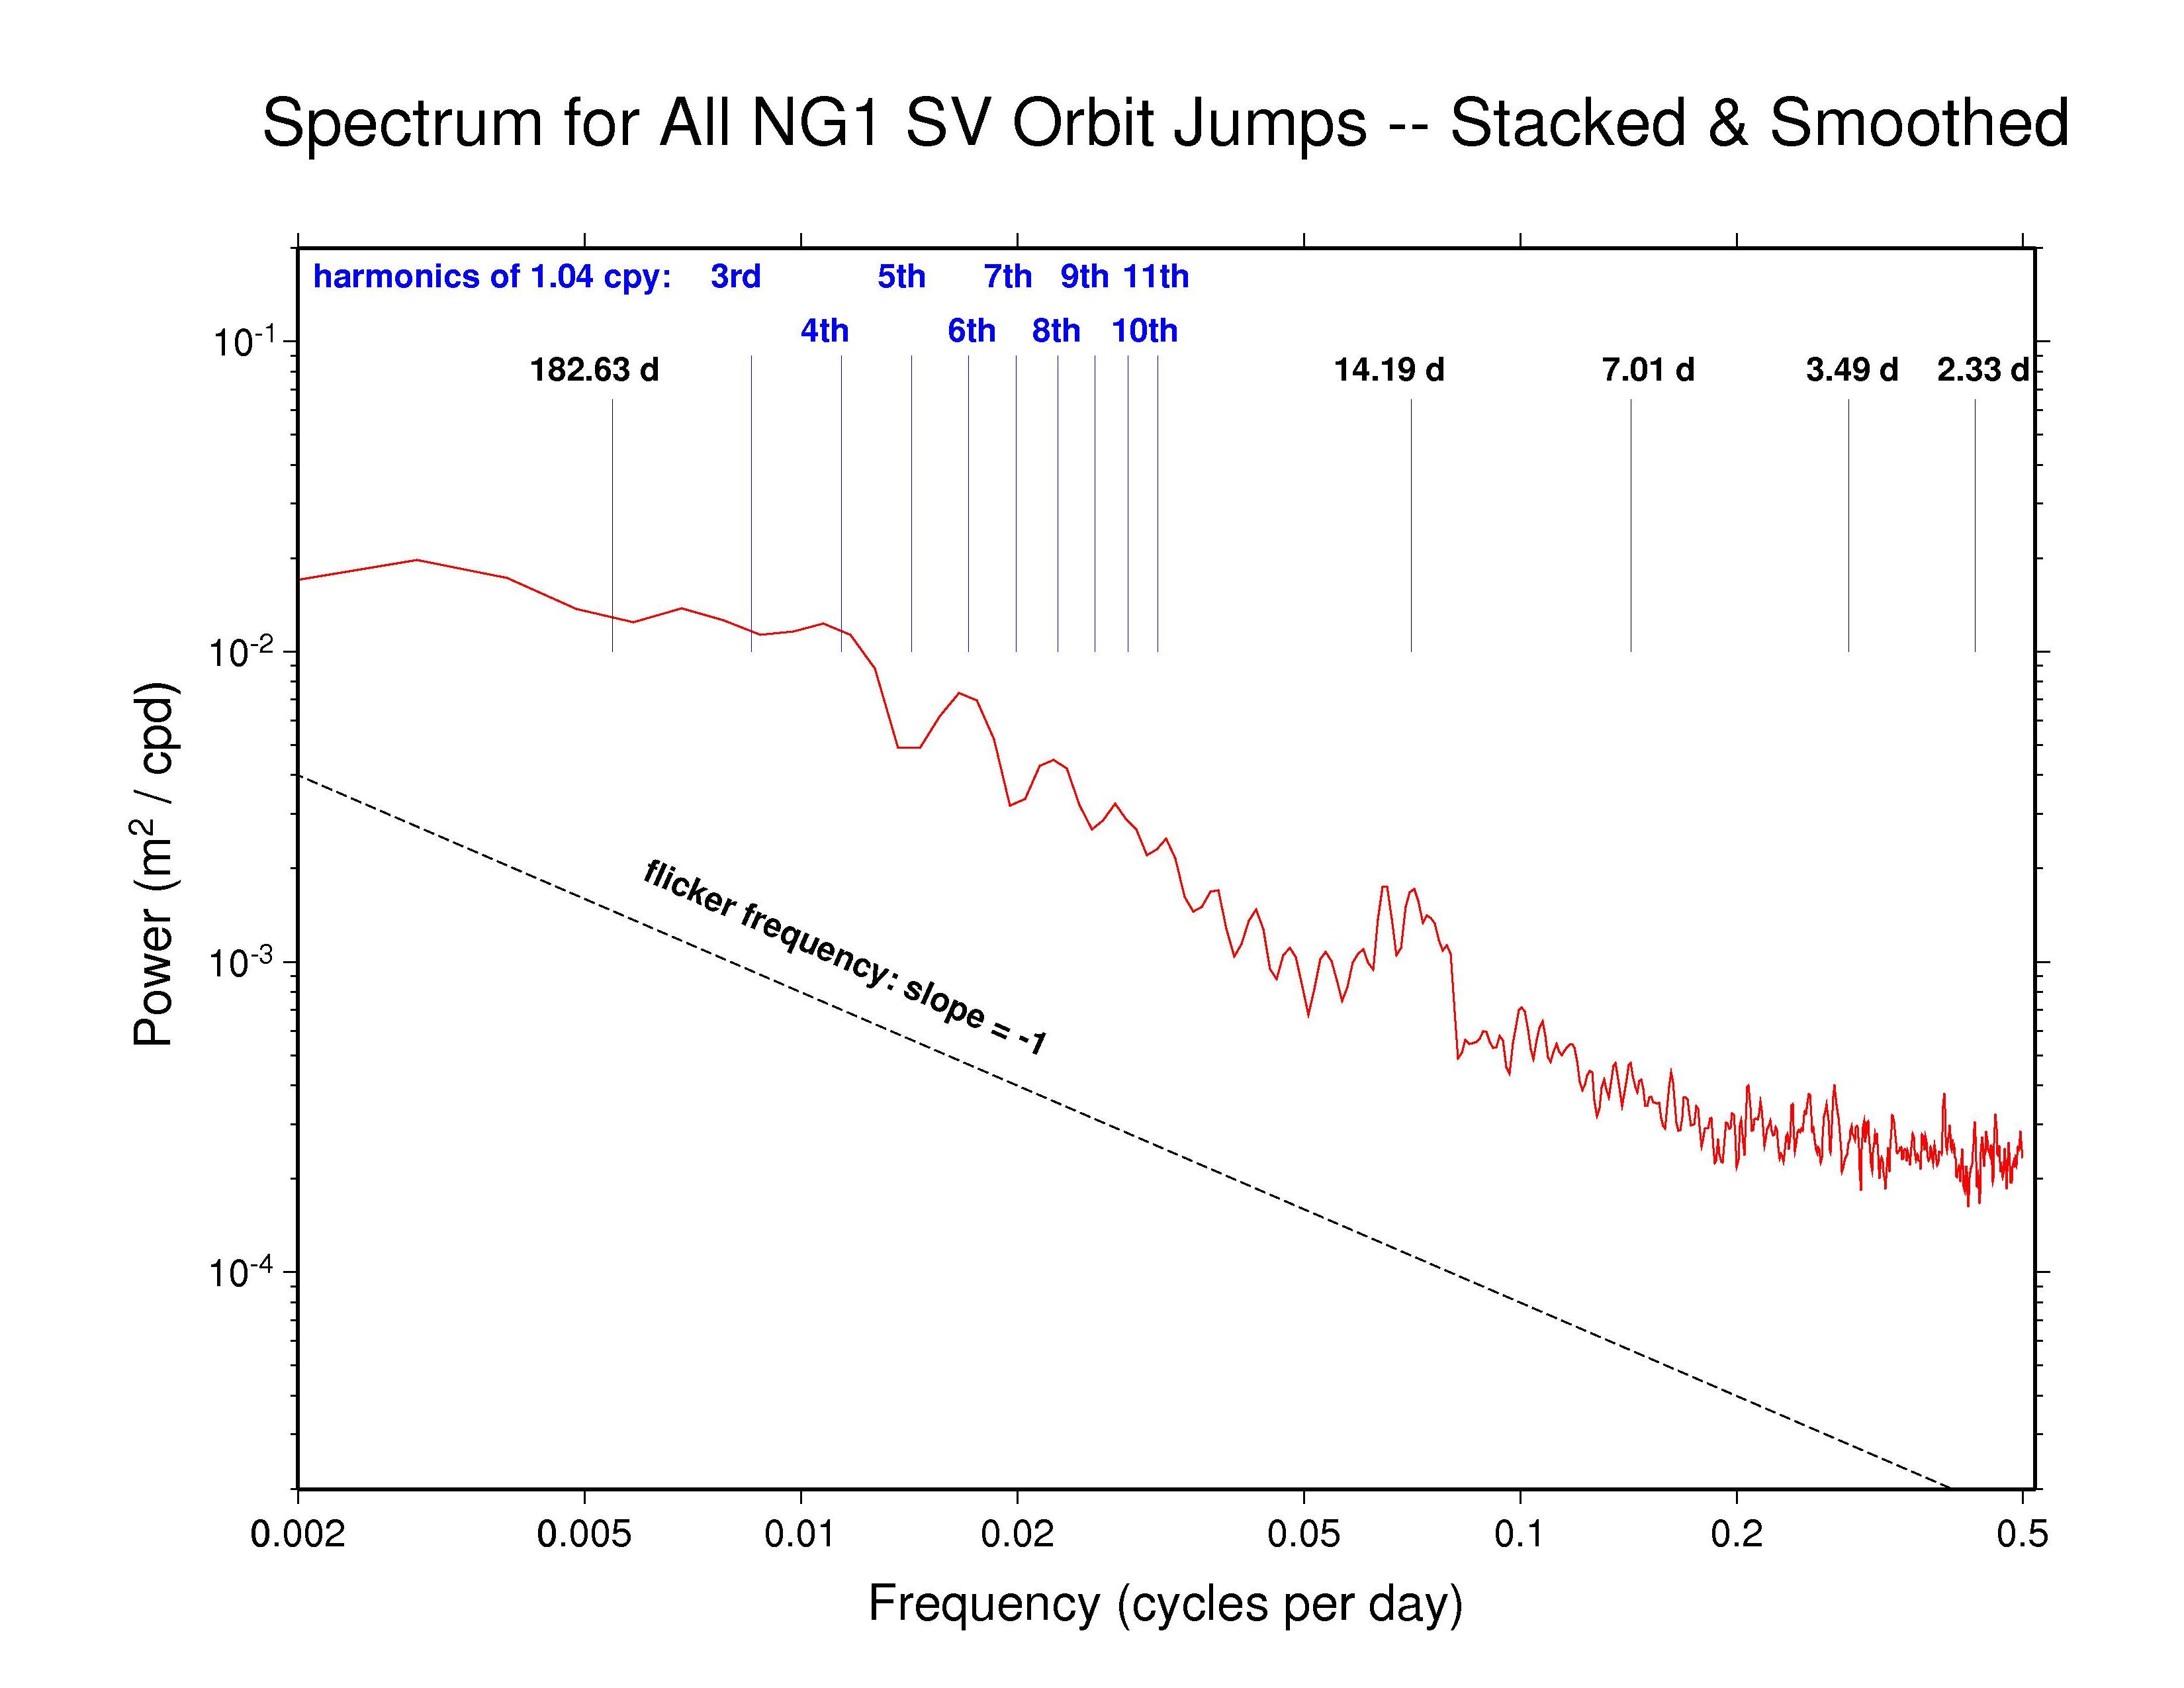 NGS orbit discontinuity spectra